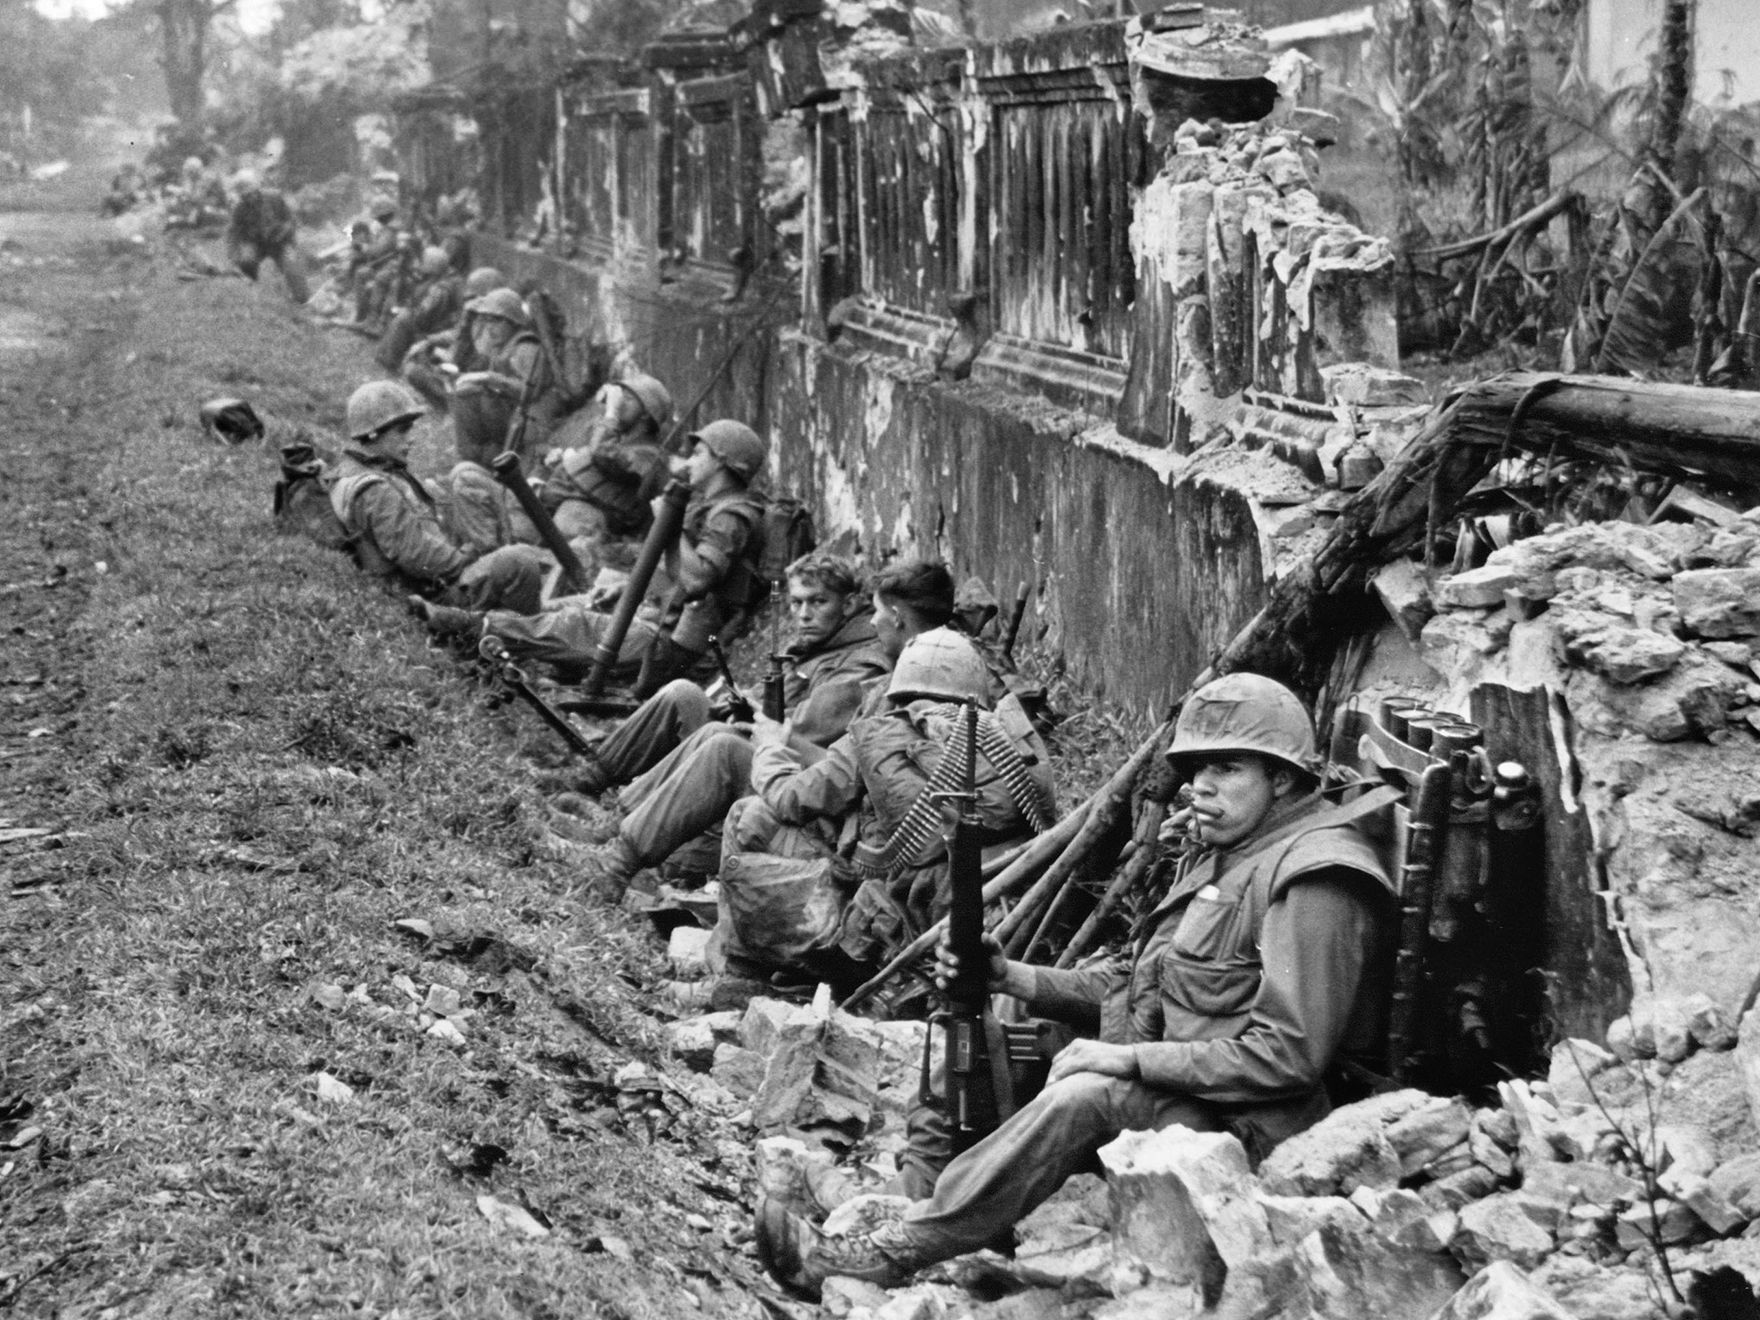 A unit of the 1st Battalion, 5th Marine Regiment, rests alongside a battered wall of Hue's imperial palace after a battle for the citadel in February 1968, during the Tet Offensive. 